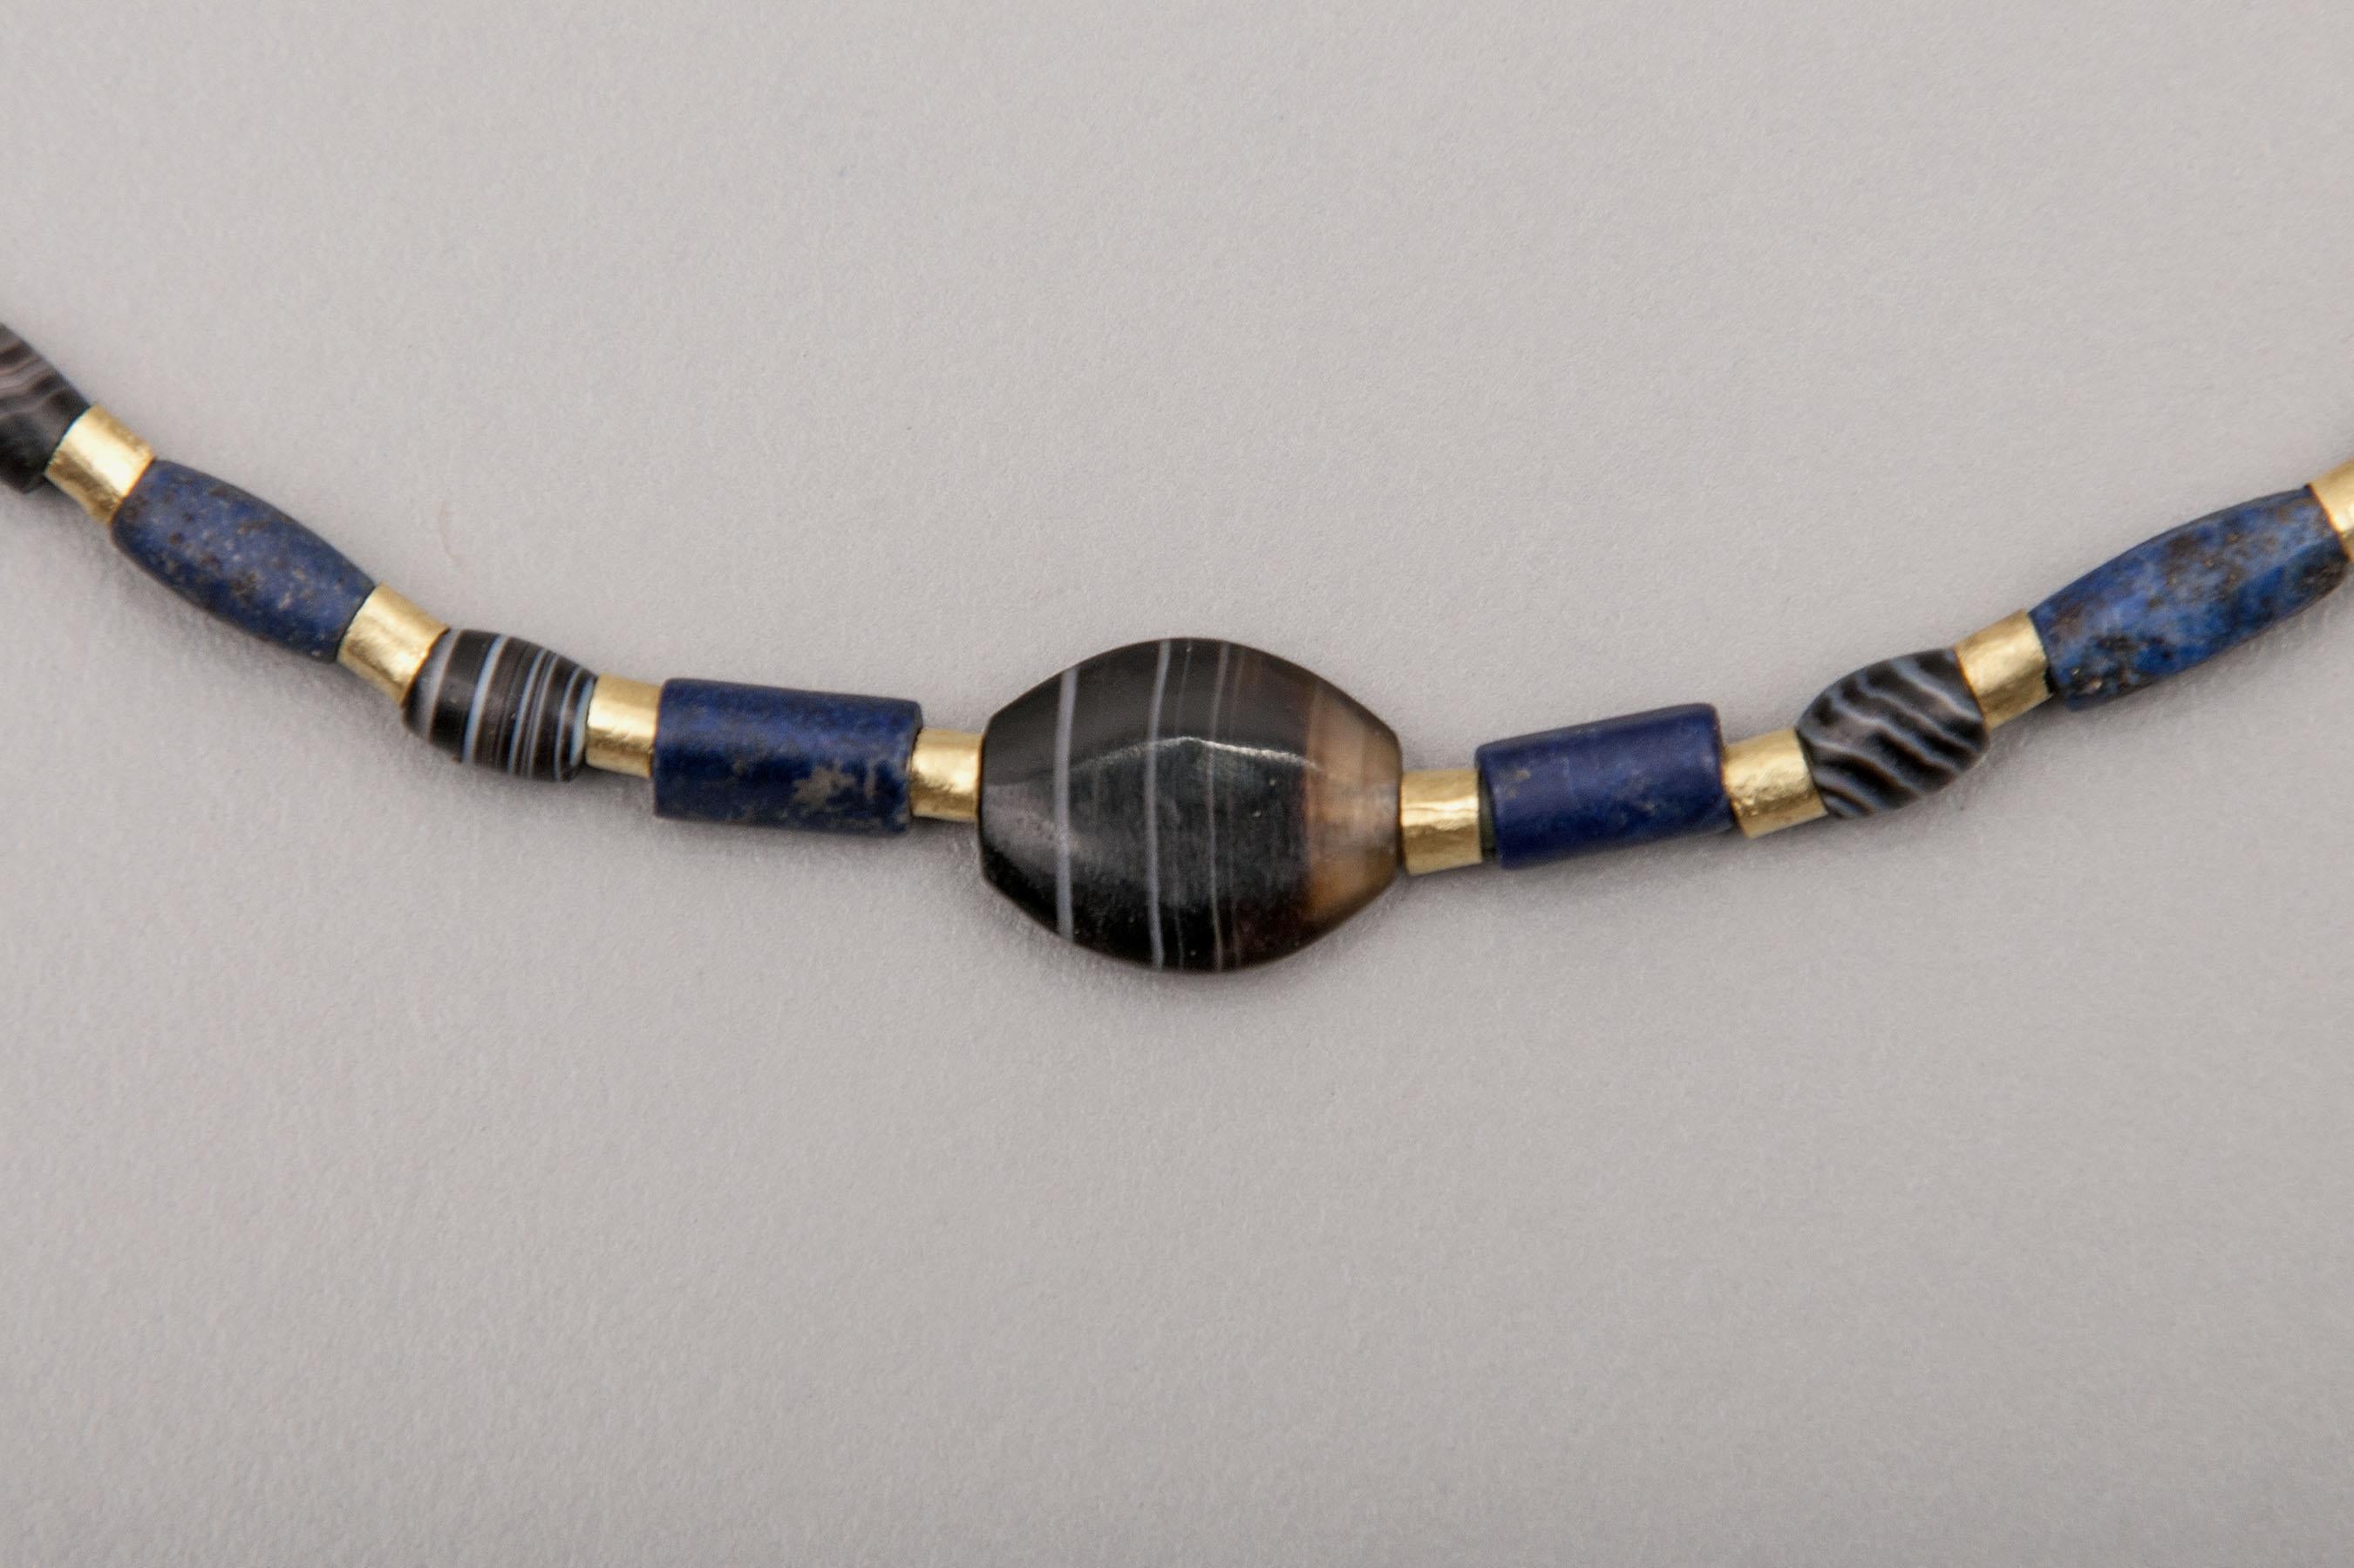 Twenty-six very small black onyx barrel beads alternating with twenty-eight lapis lazuli cylinder beads. Between each of the stone beads is a 22k gold tube bead. At the center of the necklace is an onyx lozenge shaped bead 1.15 cm in length, 9 mm in